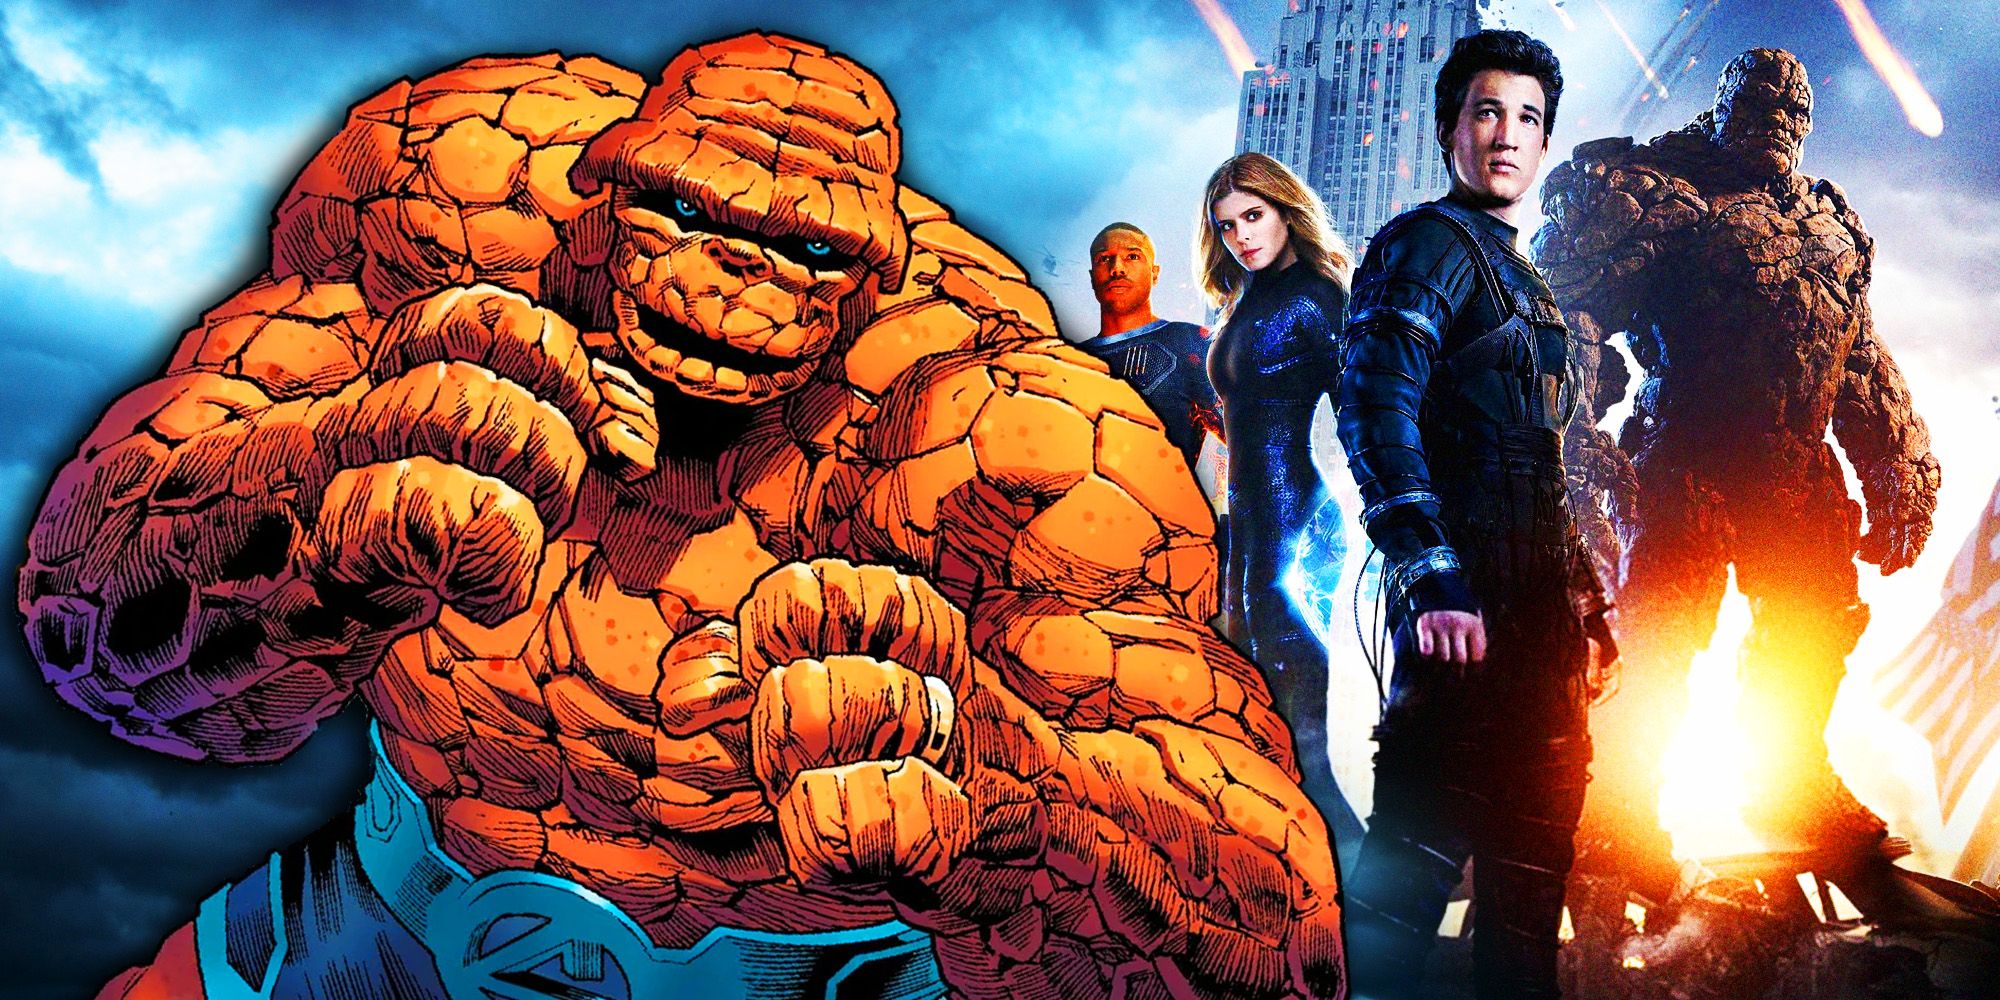 The Thing from the comic books and Fant4stic cast